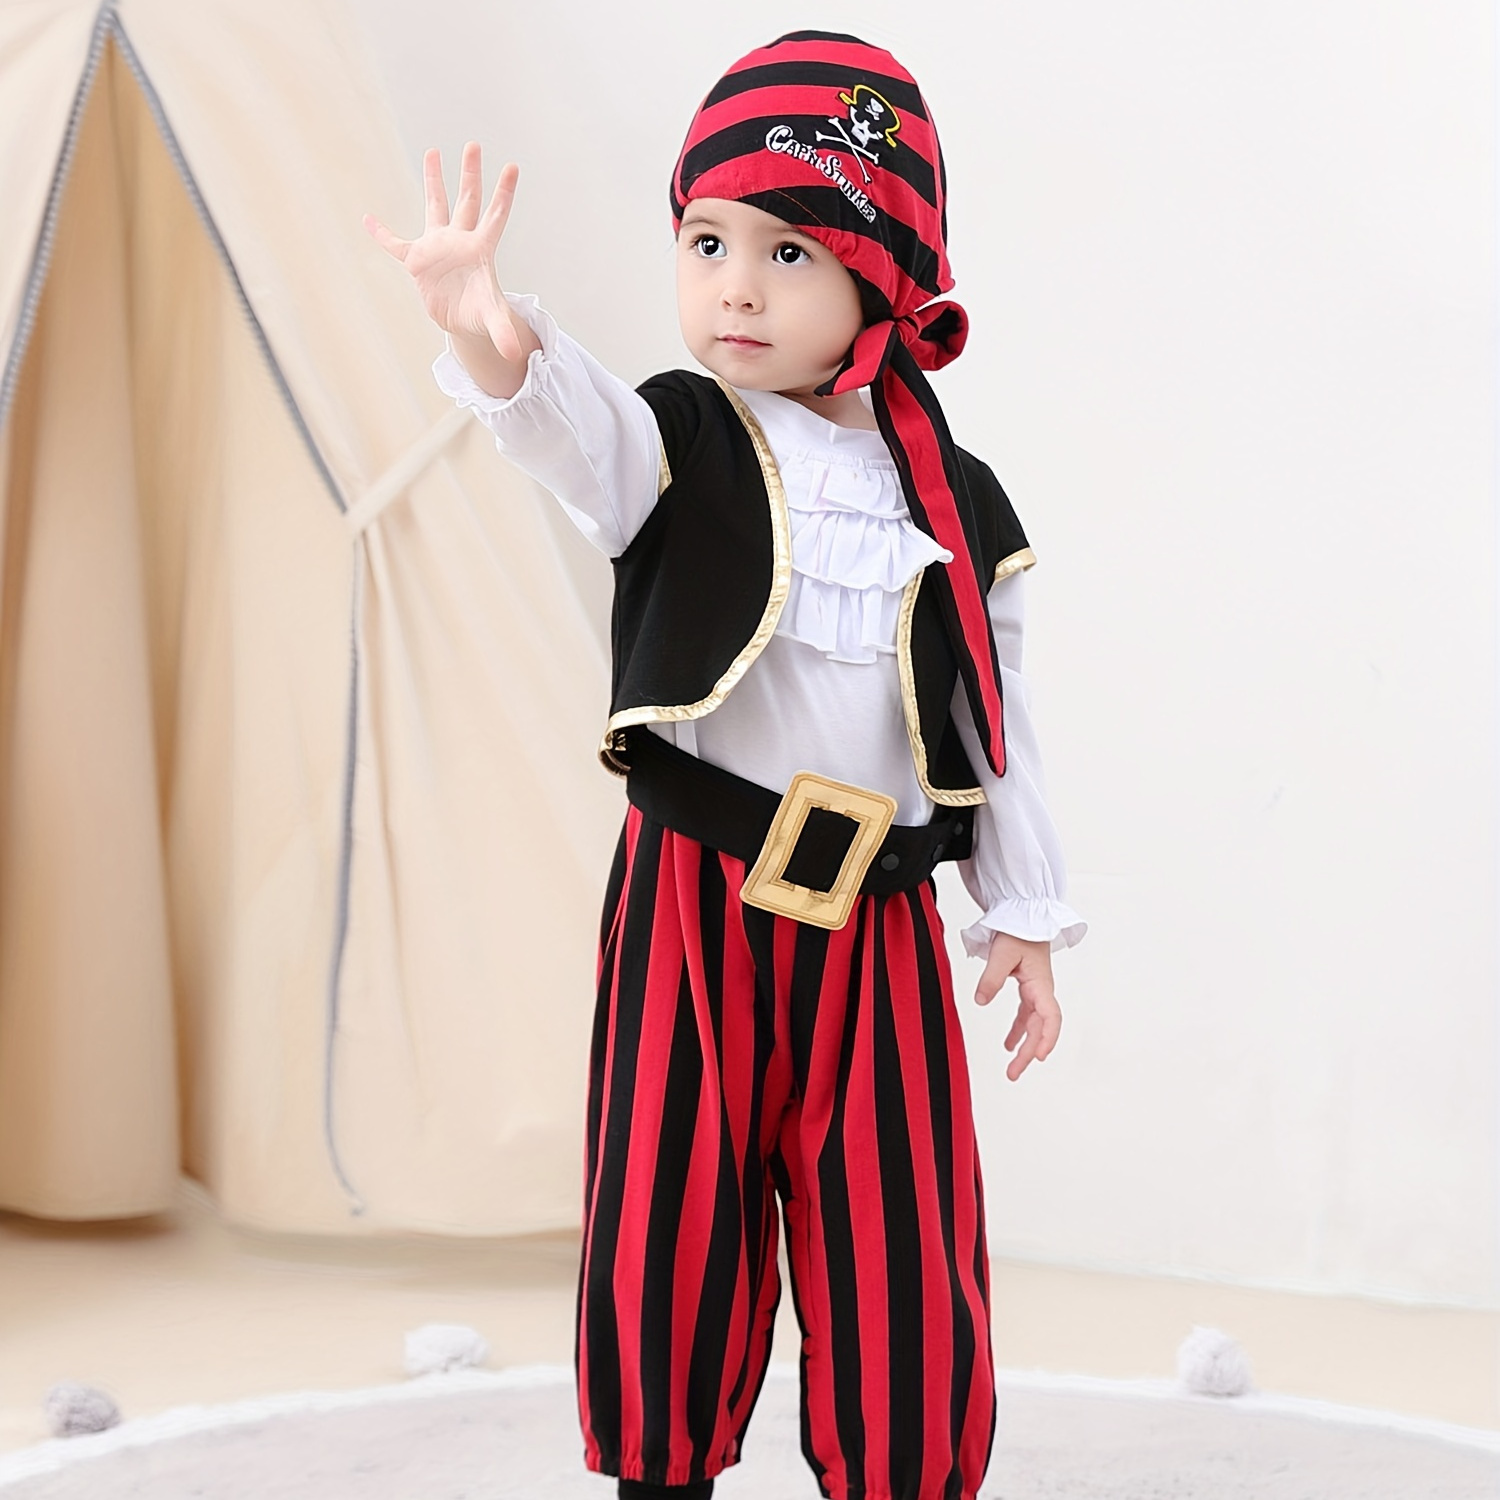 

Baby Boy's Cotton Halloween Performance Clothes, Striped Trousers, Climbing Clothes, Spring And Autumn Long Sleeves Children's Holiday Clothes